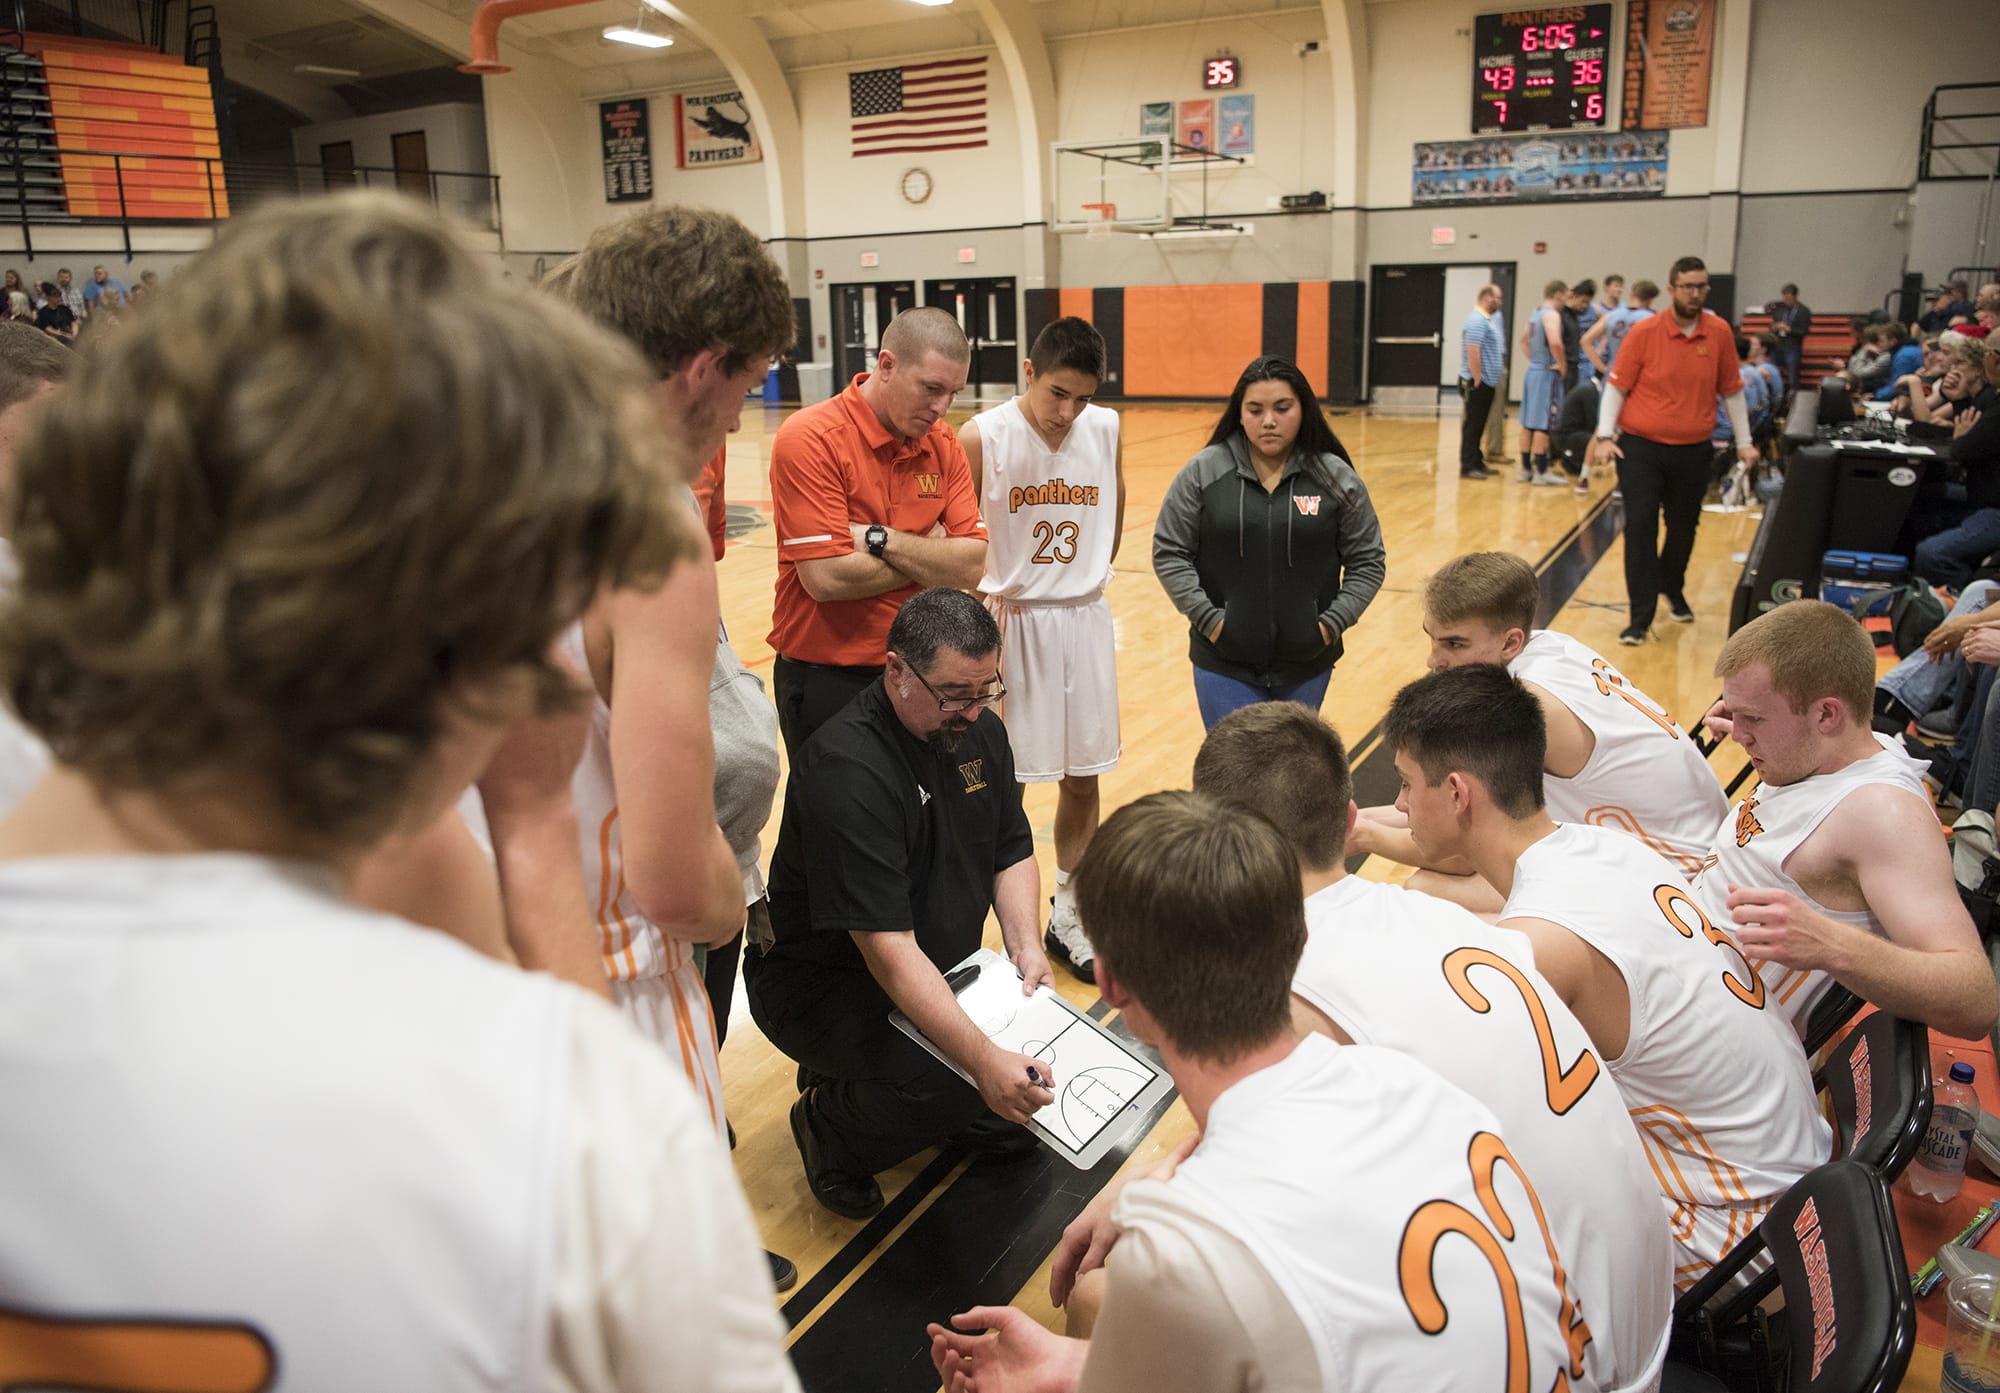 Washougal head coach A.J. Labree talks to his team during a timeout at Tuesday night's game against Stevenson in Washougal on Nov. 27, 2018. Washougal won 58-39.